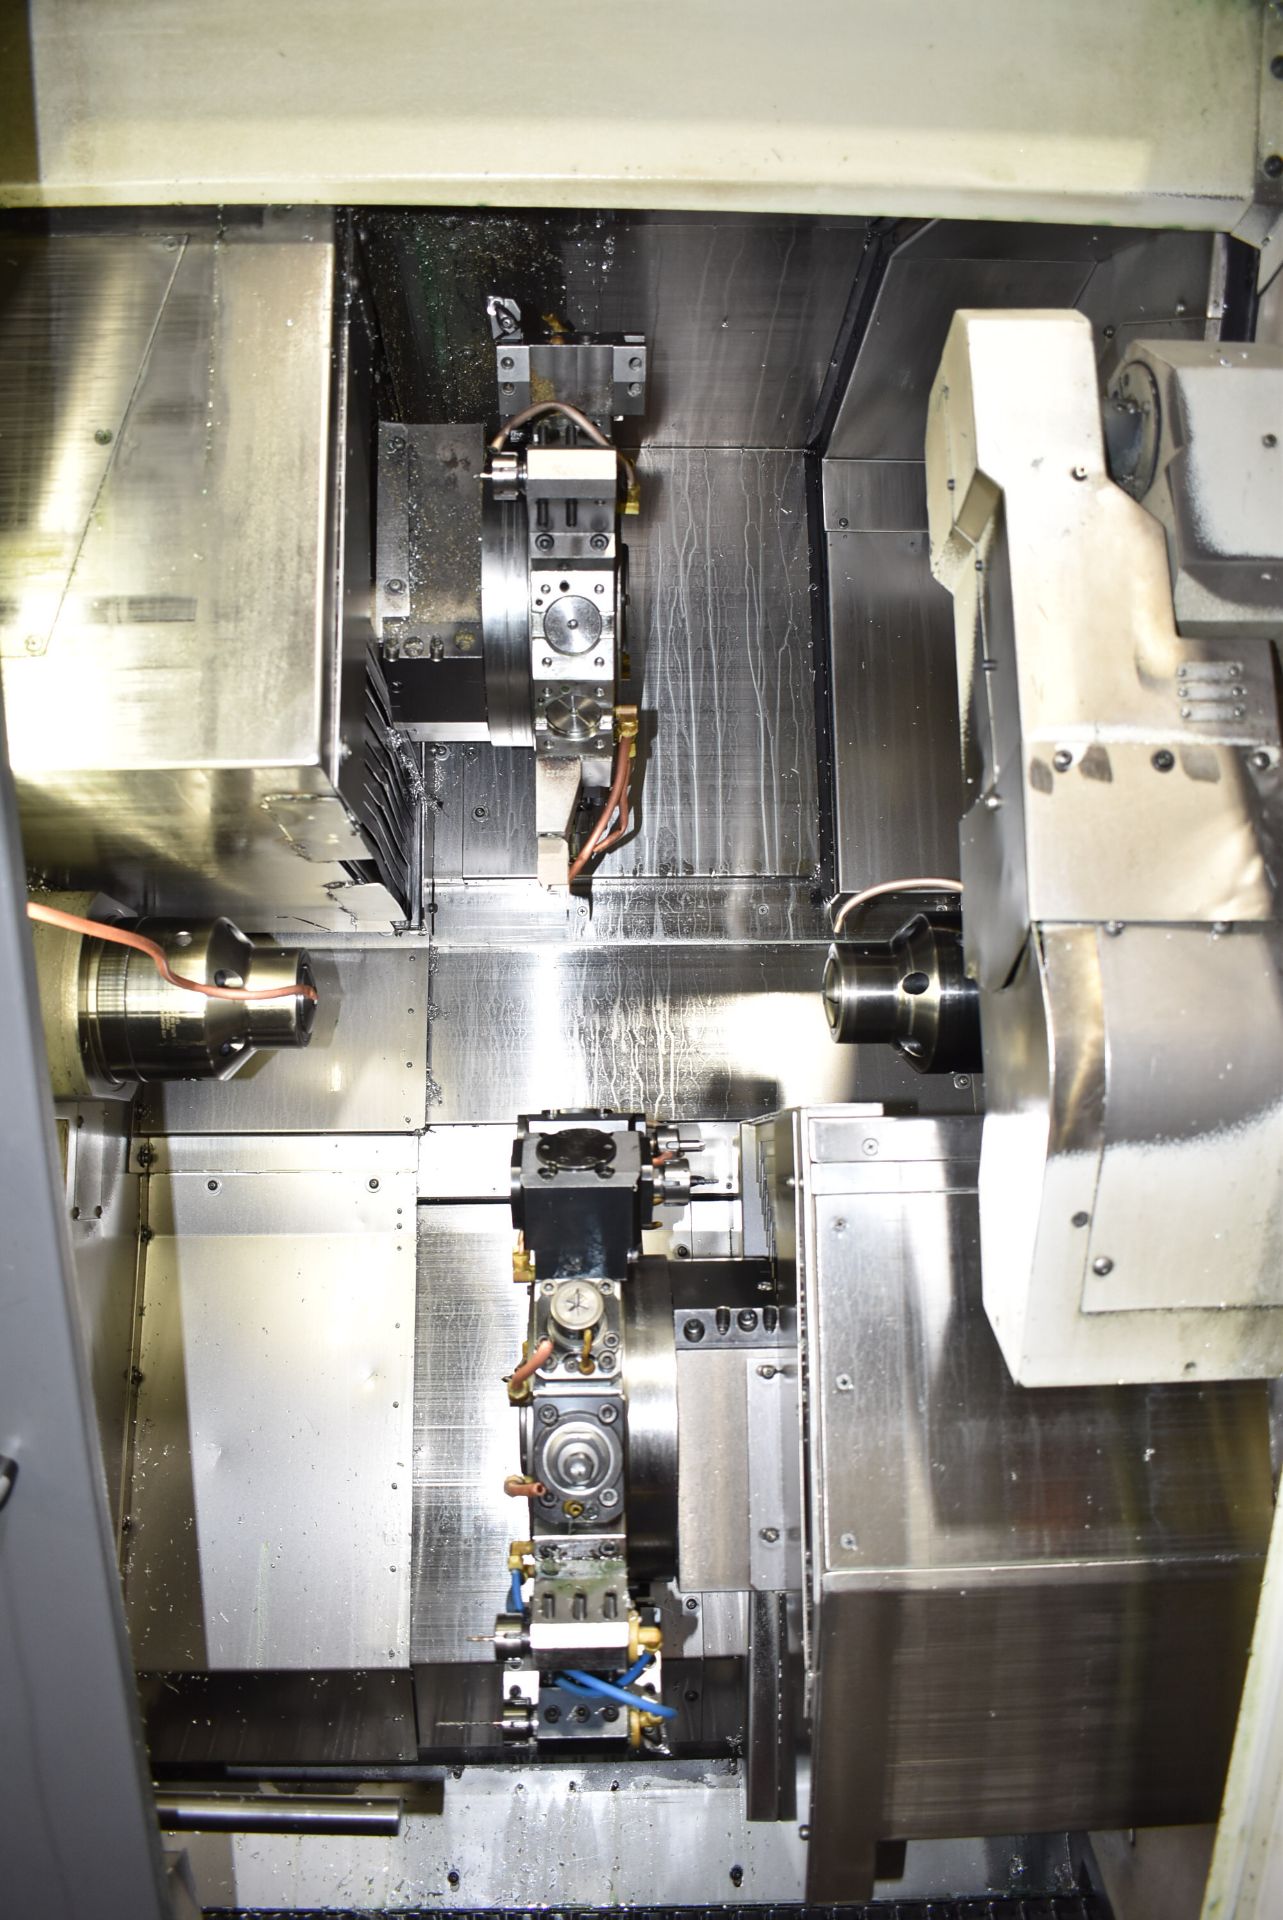 NAKAMURA-TOME (2005) WT-100 MMYS MULTI-AXIS OPPOSED SPINDLE AND TWIN TURRET CNC MULTI-TASKING CENTER - Image 2 of 17